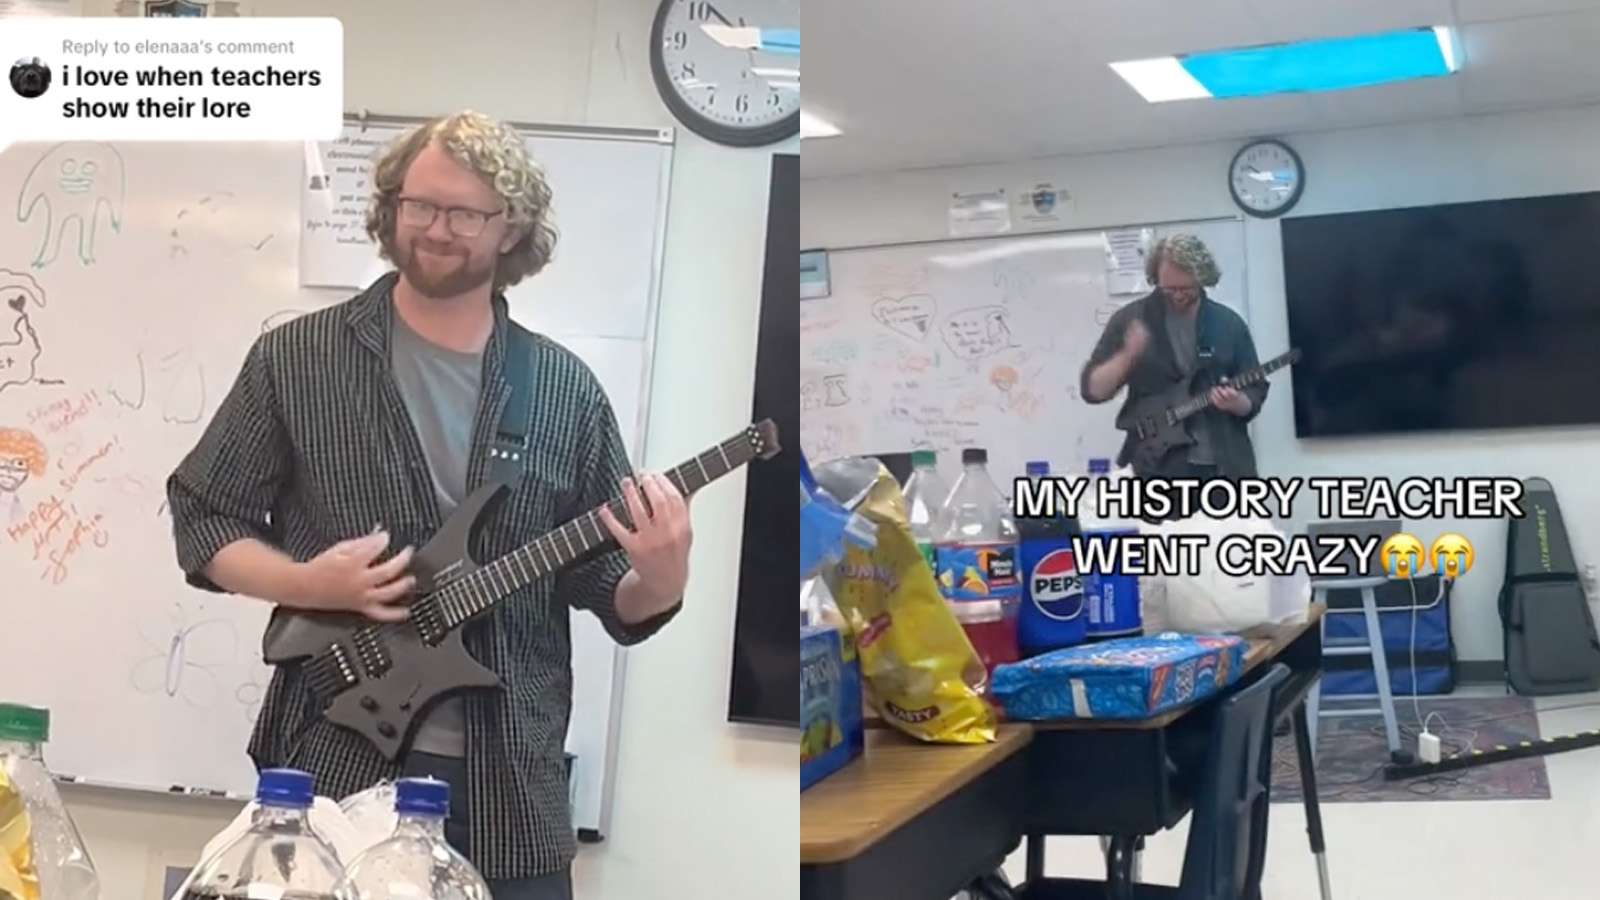 Teacher impresses by playing 50 Cent’s ‘Candy Shop’ on guitar in viral TikTok - Dexerto